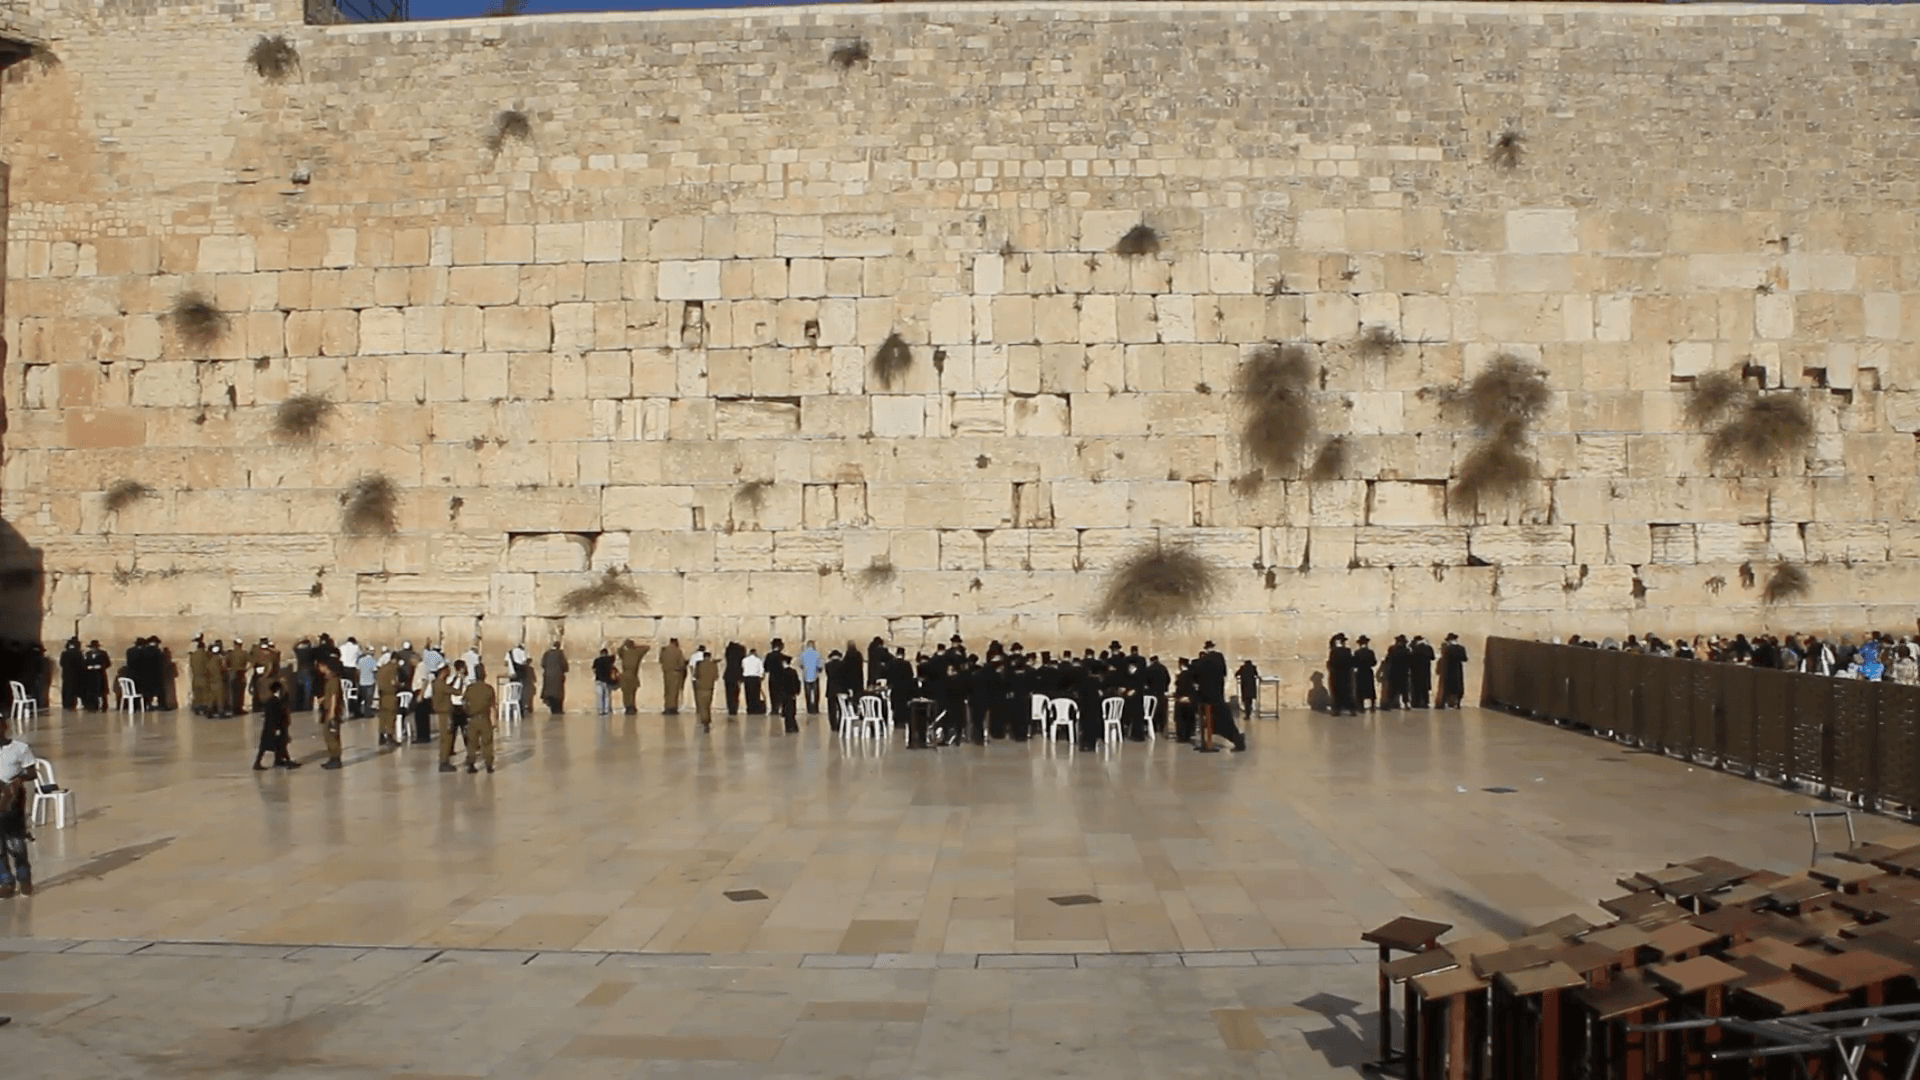 The Wailing Place of the Jews. Wailing Wall. Western Wall